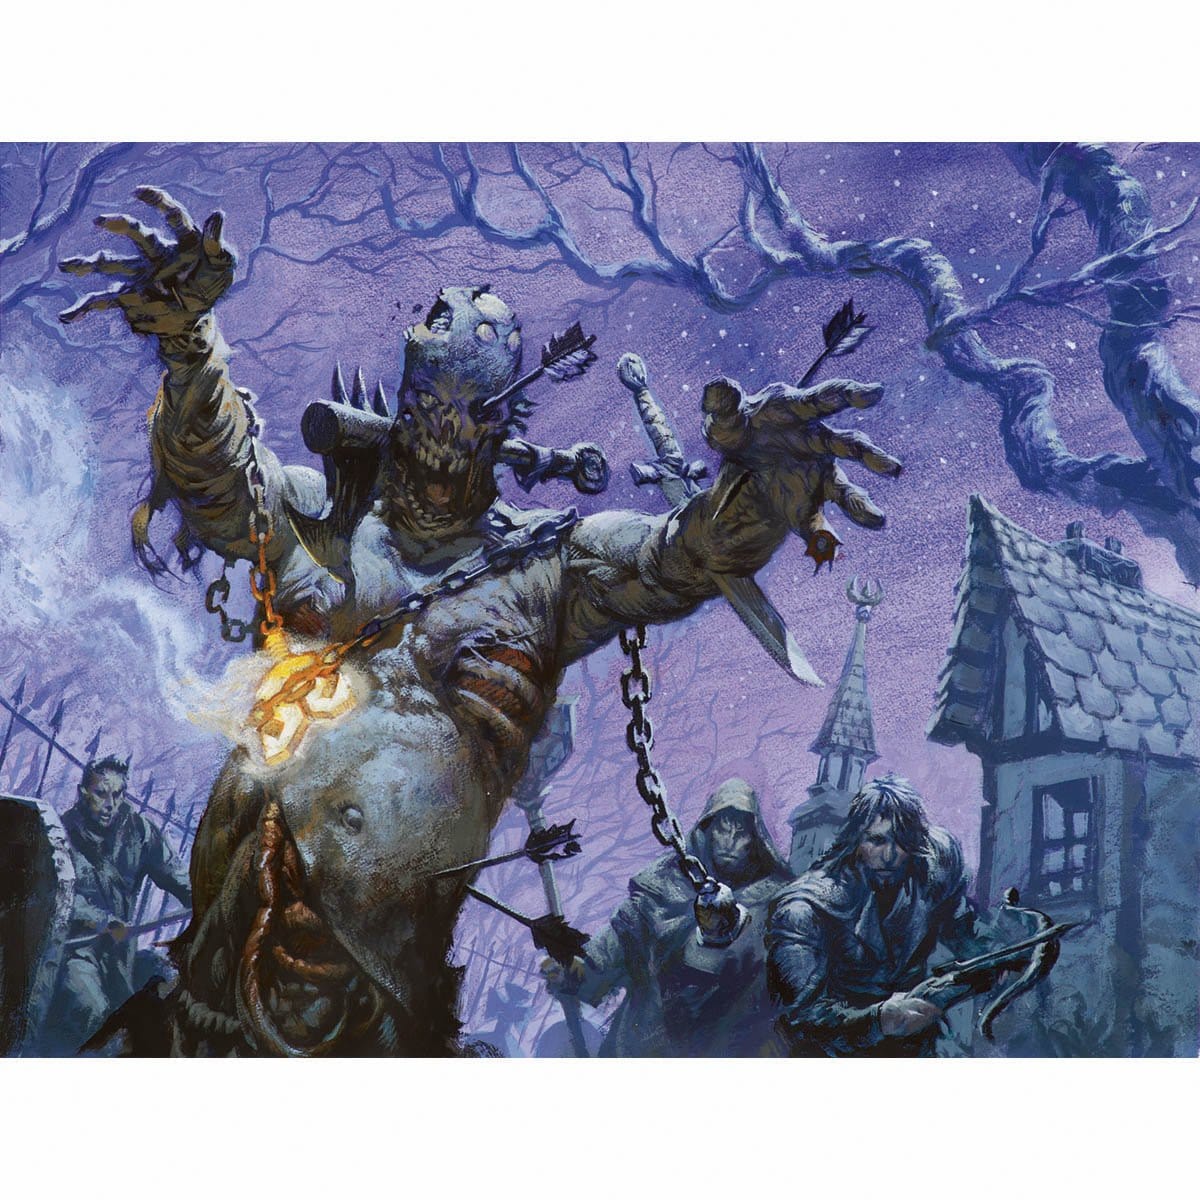 Butcher Ghoul Print - Print - Original Magic Art - Accessories for Magic the Gathering and other card games